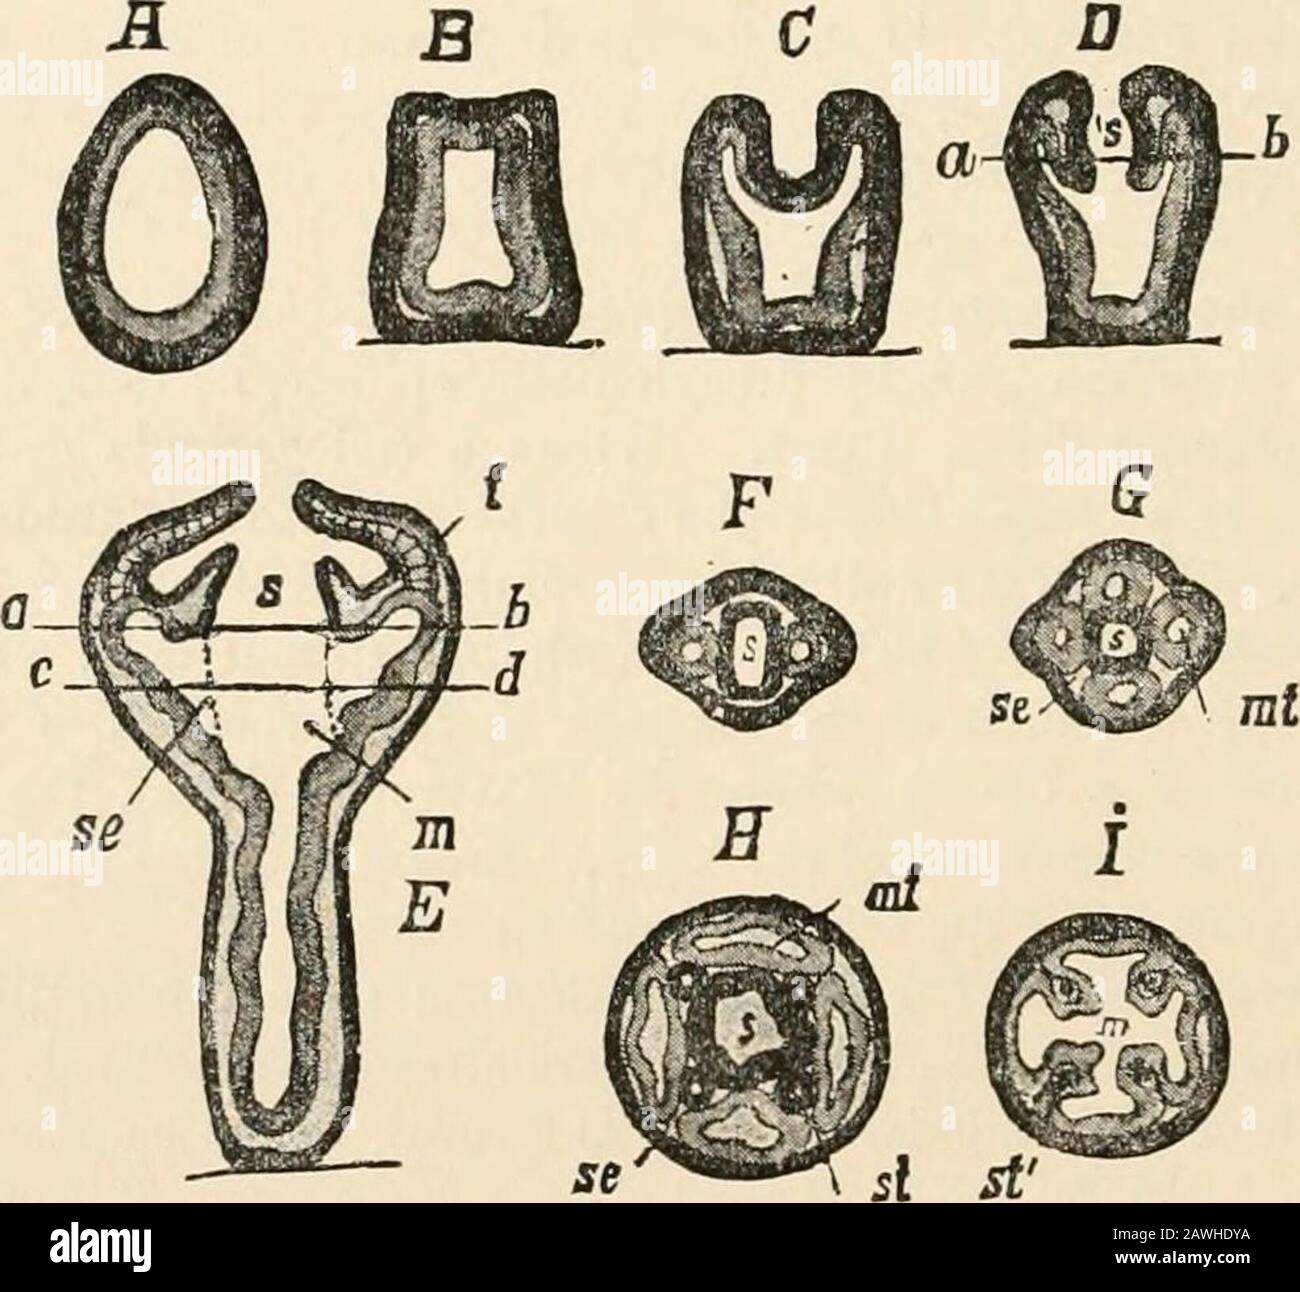 Text-book of comparative anatomy . gastric pouches of the Scyphula (G, mt). TheVOL. I K 130 COMPARA TIVE ANA TOMY CHAP. neighbouring endodermal walls of every 2 gastric pouches apply themselves to eachother and form the partition walls or septa (H, se), which are continued also, withfree axial edges, into the central gastric cavity, and there form the so-called gastricridges. The first 4 tentacles (E, t), arise around the oral disc as outgrowths of theectoderm and endoderm. The encloderm forms a solid axis in the tentacles, whicharise over the 4 gastric pouches, and which increase in number la Stock Photo